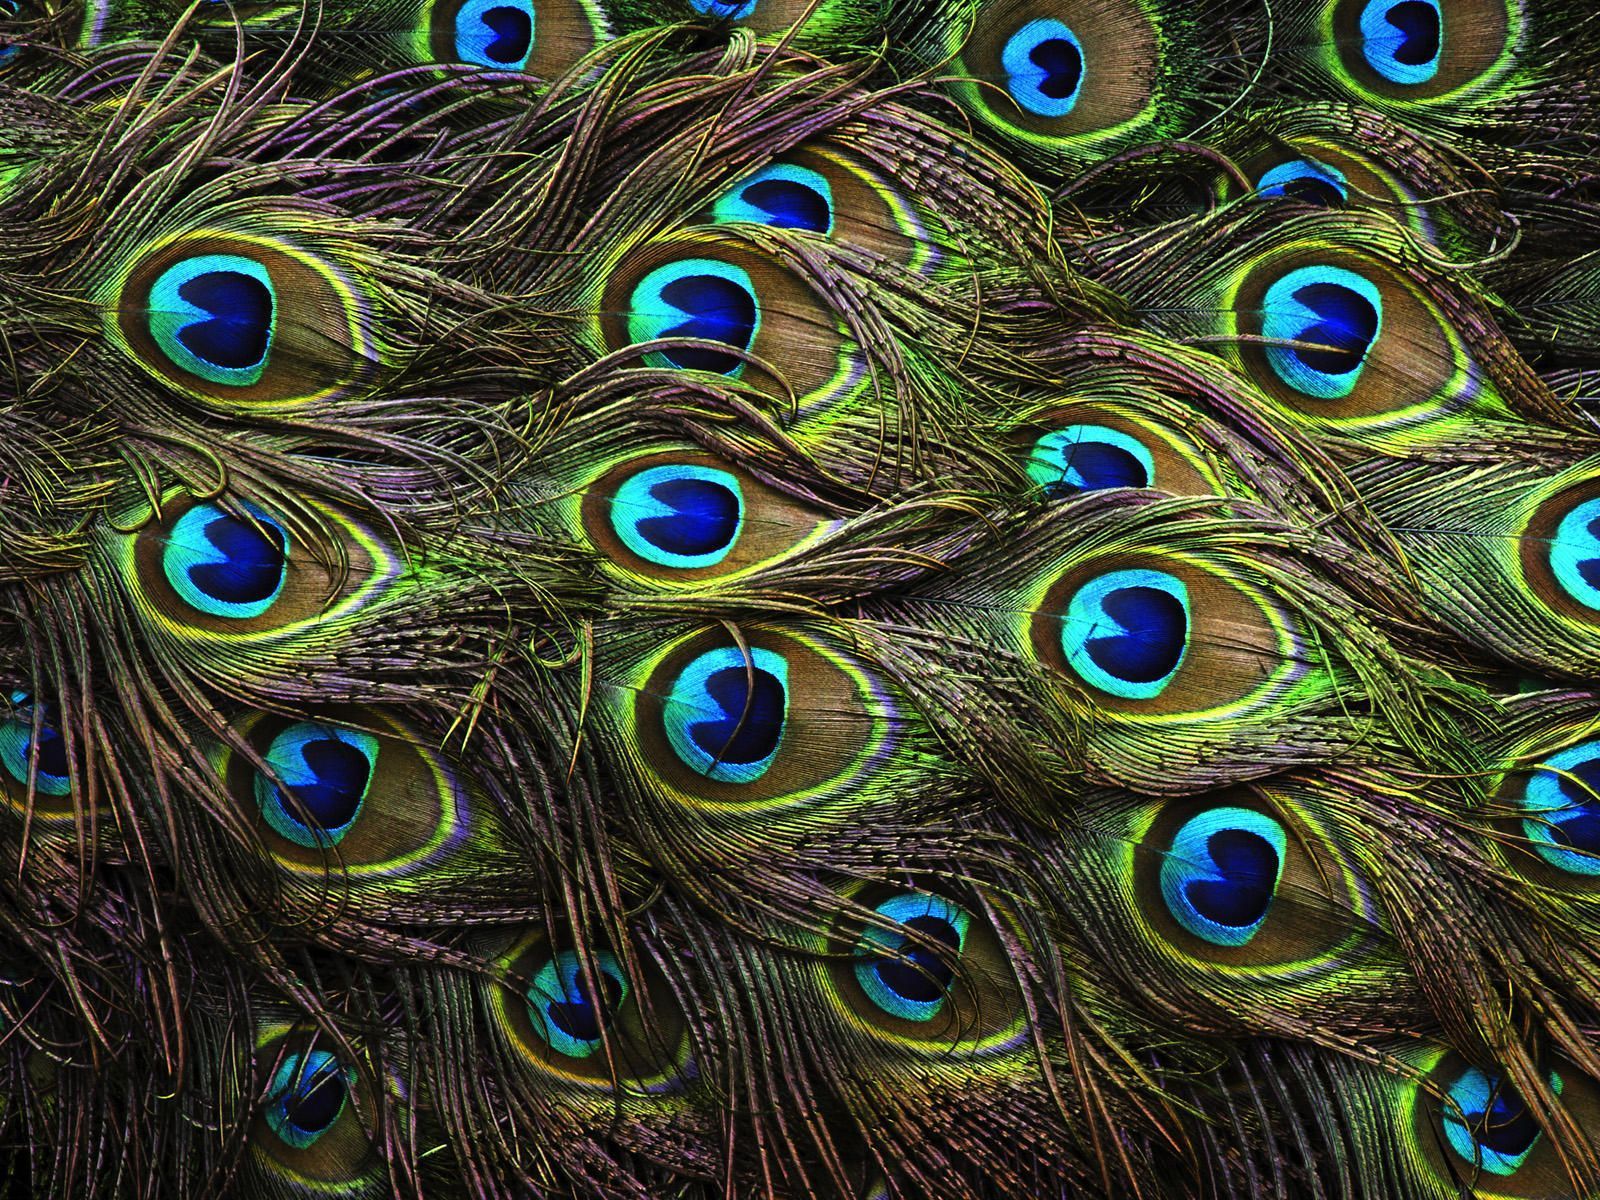 Peacock Feathers HD Wallpapers, Peacock Feathers Backgrounds, New